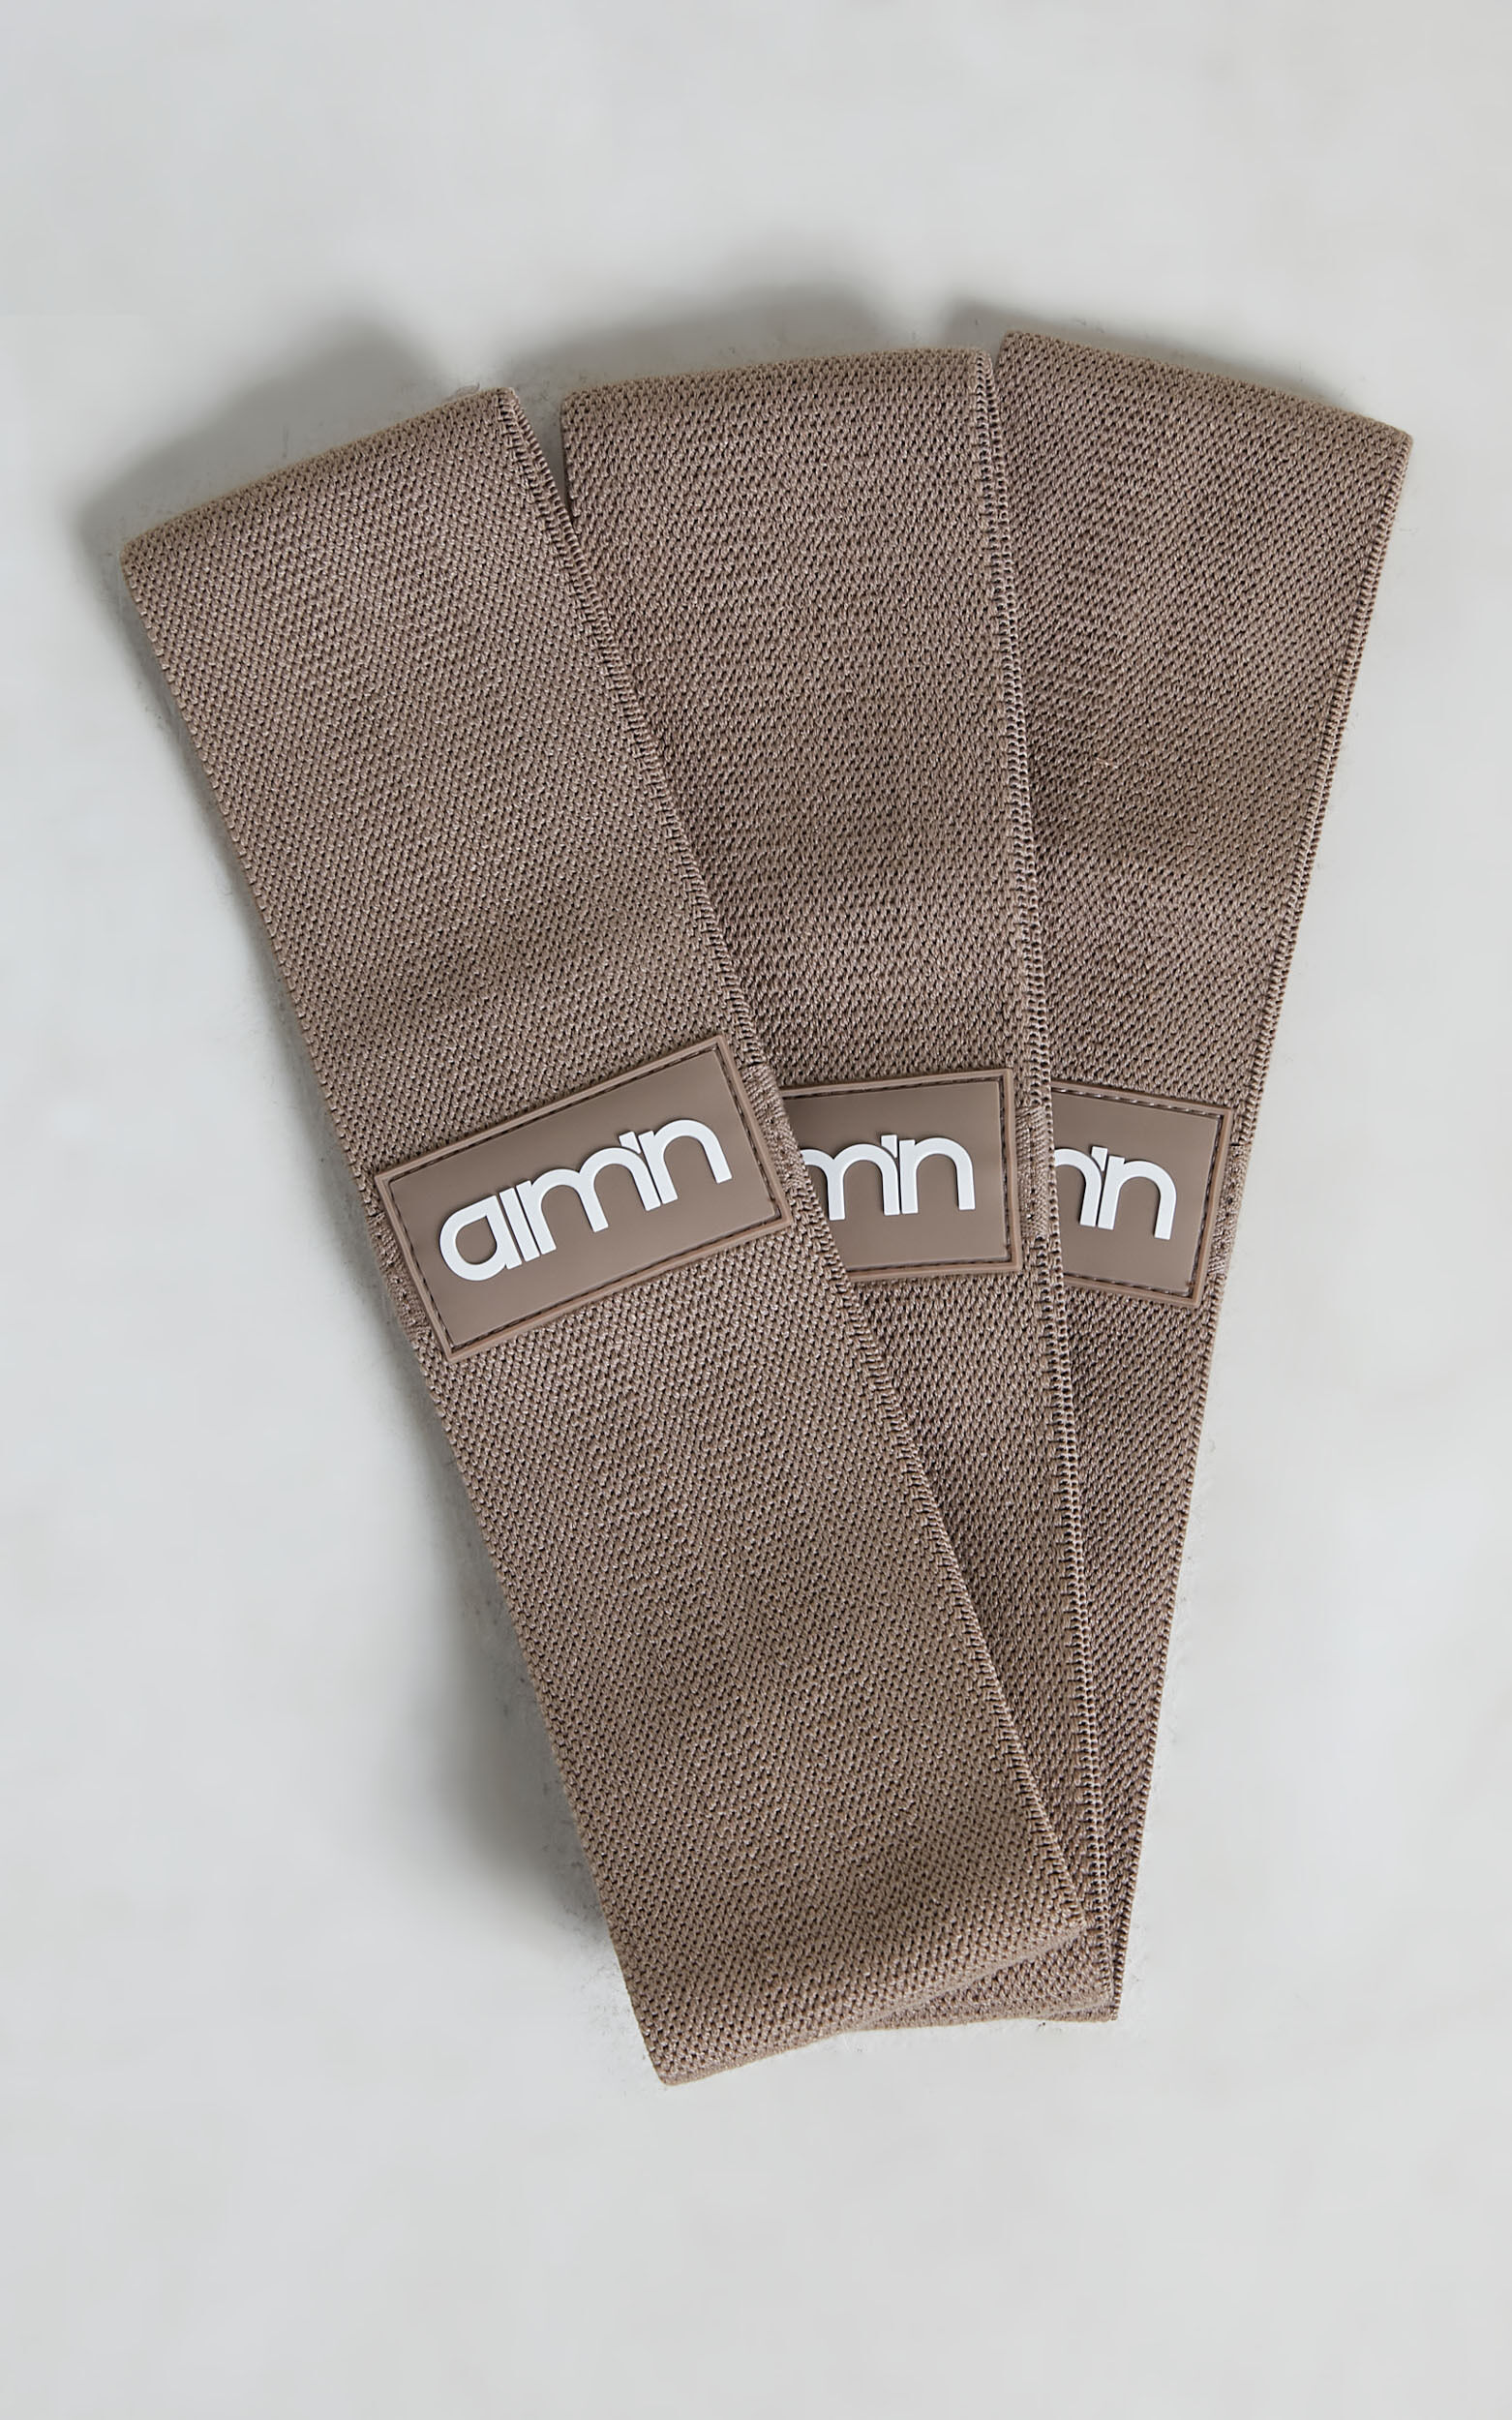 Aim'n - FABRIC RESISTANCE BANDS in Espresso - OneSize, BRN1, super-hi-res image number null